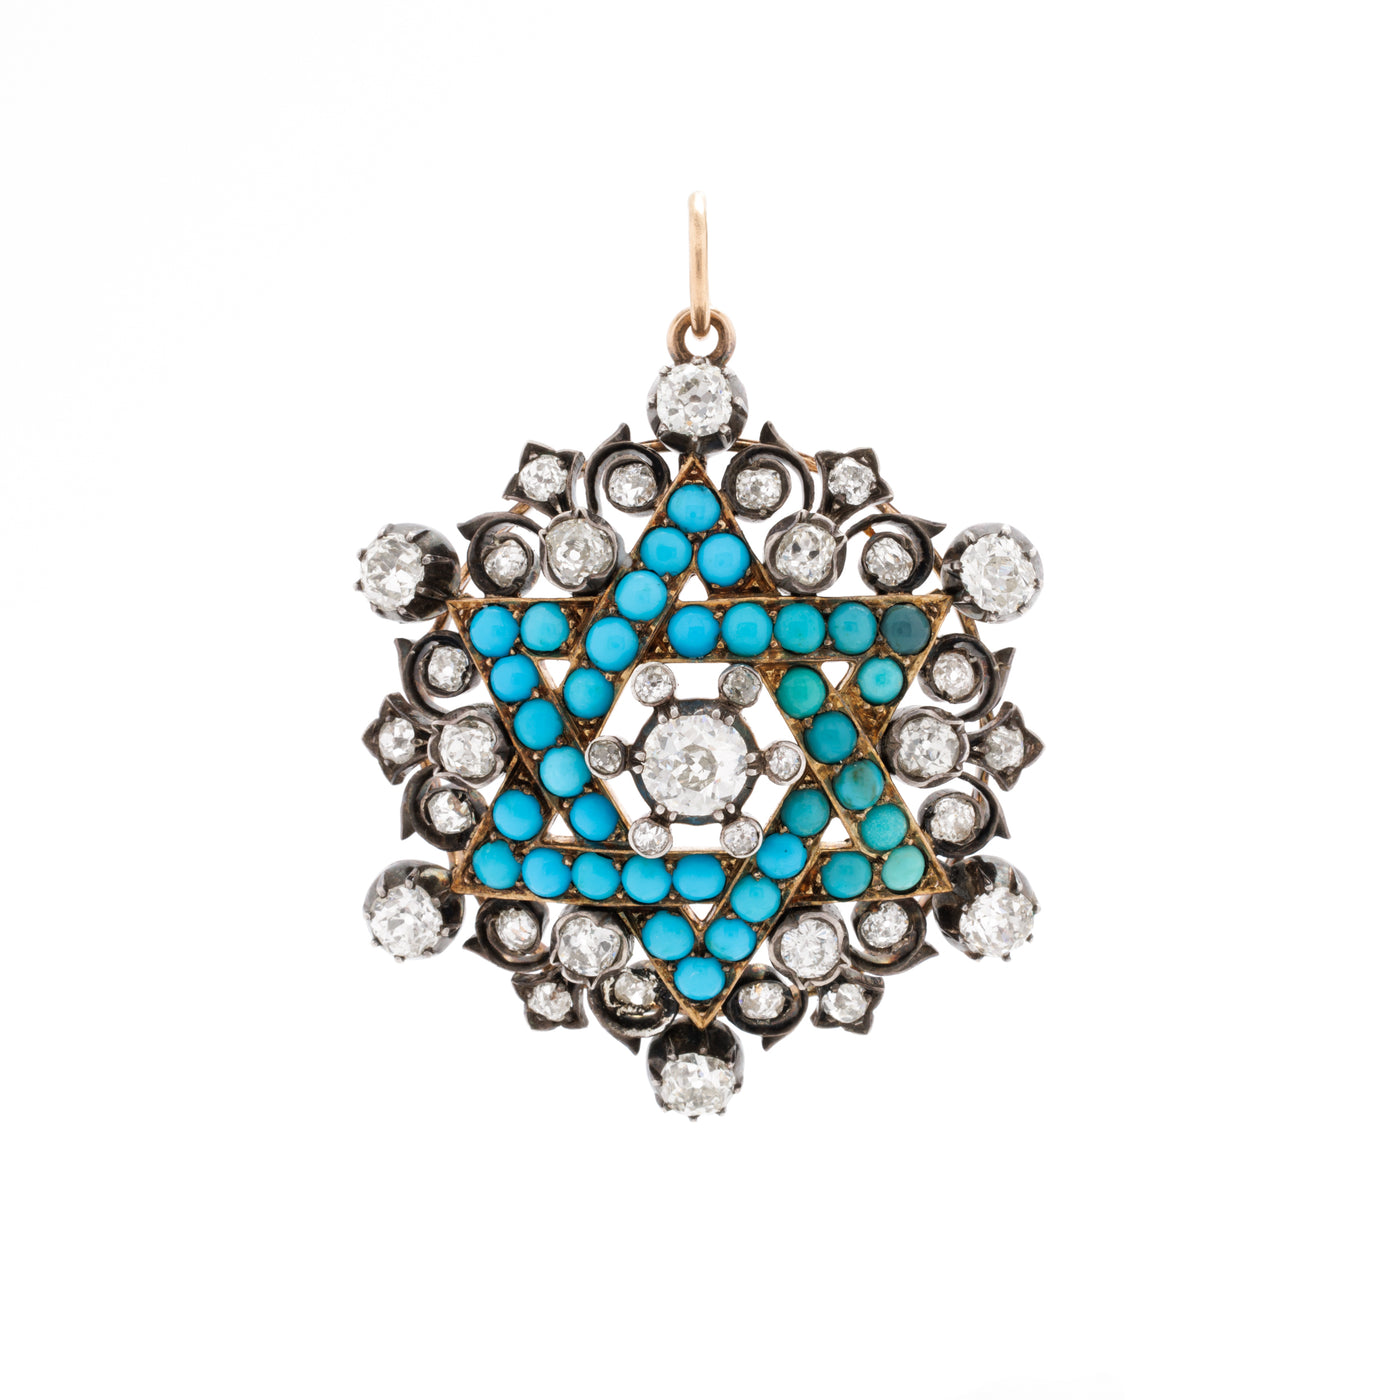 VICTORIAN 15-18K YELLOW GOLD, SILVER, DIAMOND AND PERSIAN TURQUOISE STAR OF DAVID c.1850s